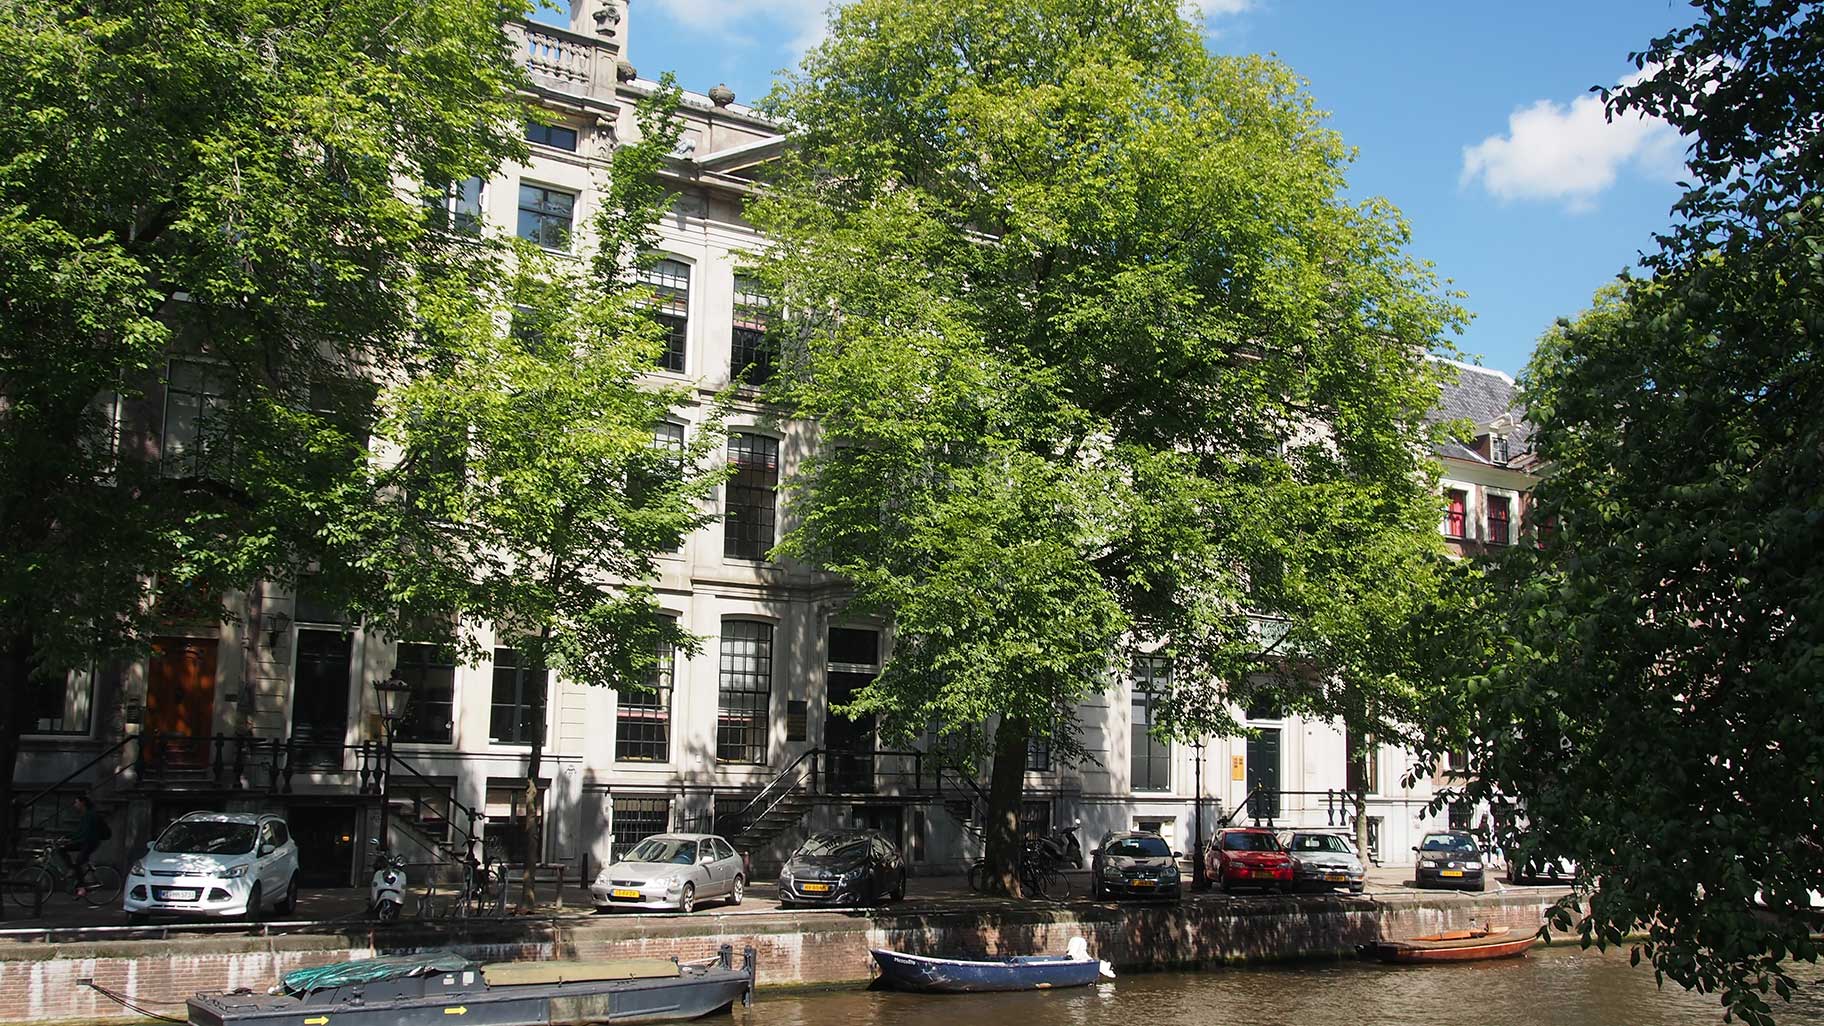 View of the Prinsengracht, Amsterdam